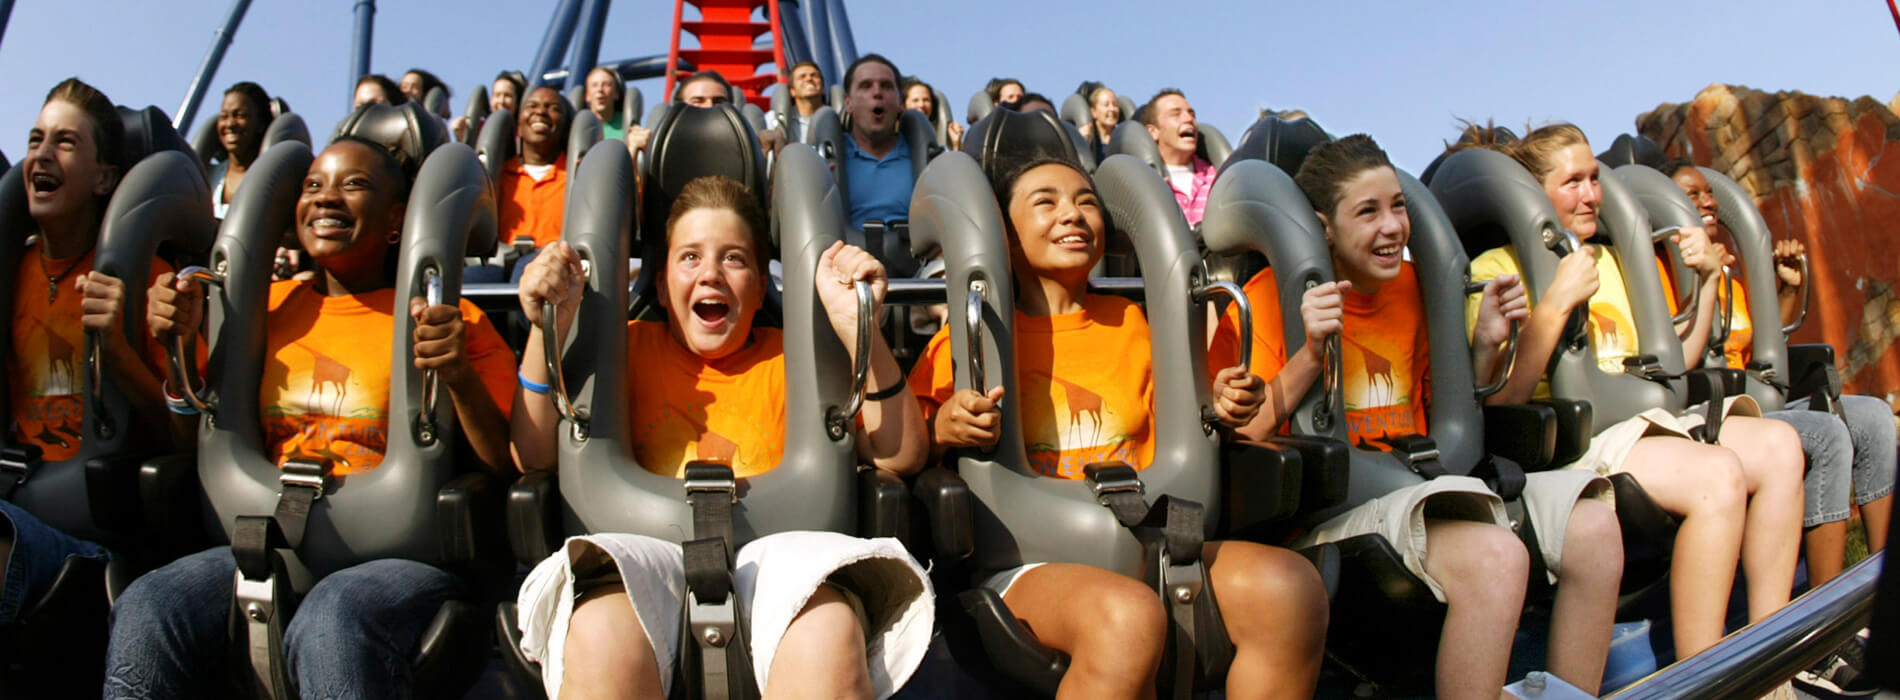 7-8 Day Camps at Busch Gardens Tampa Bay